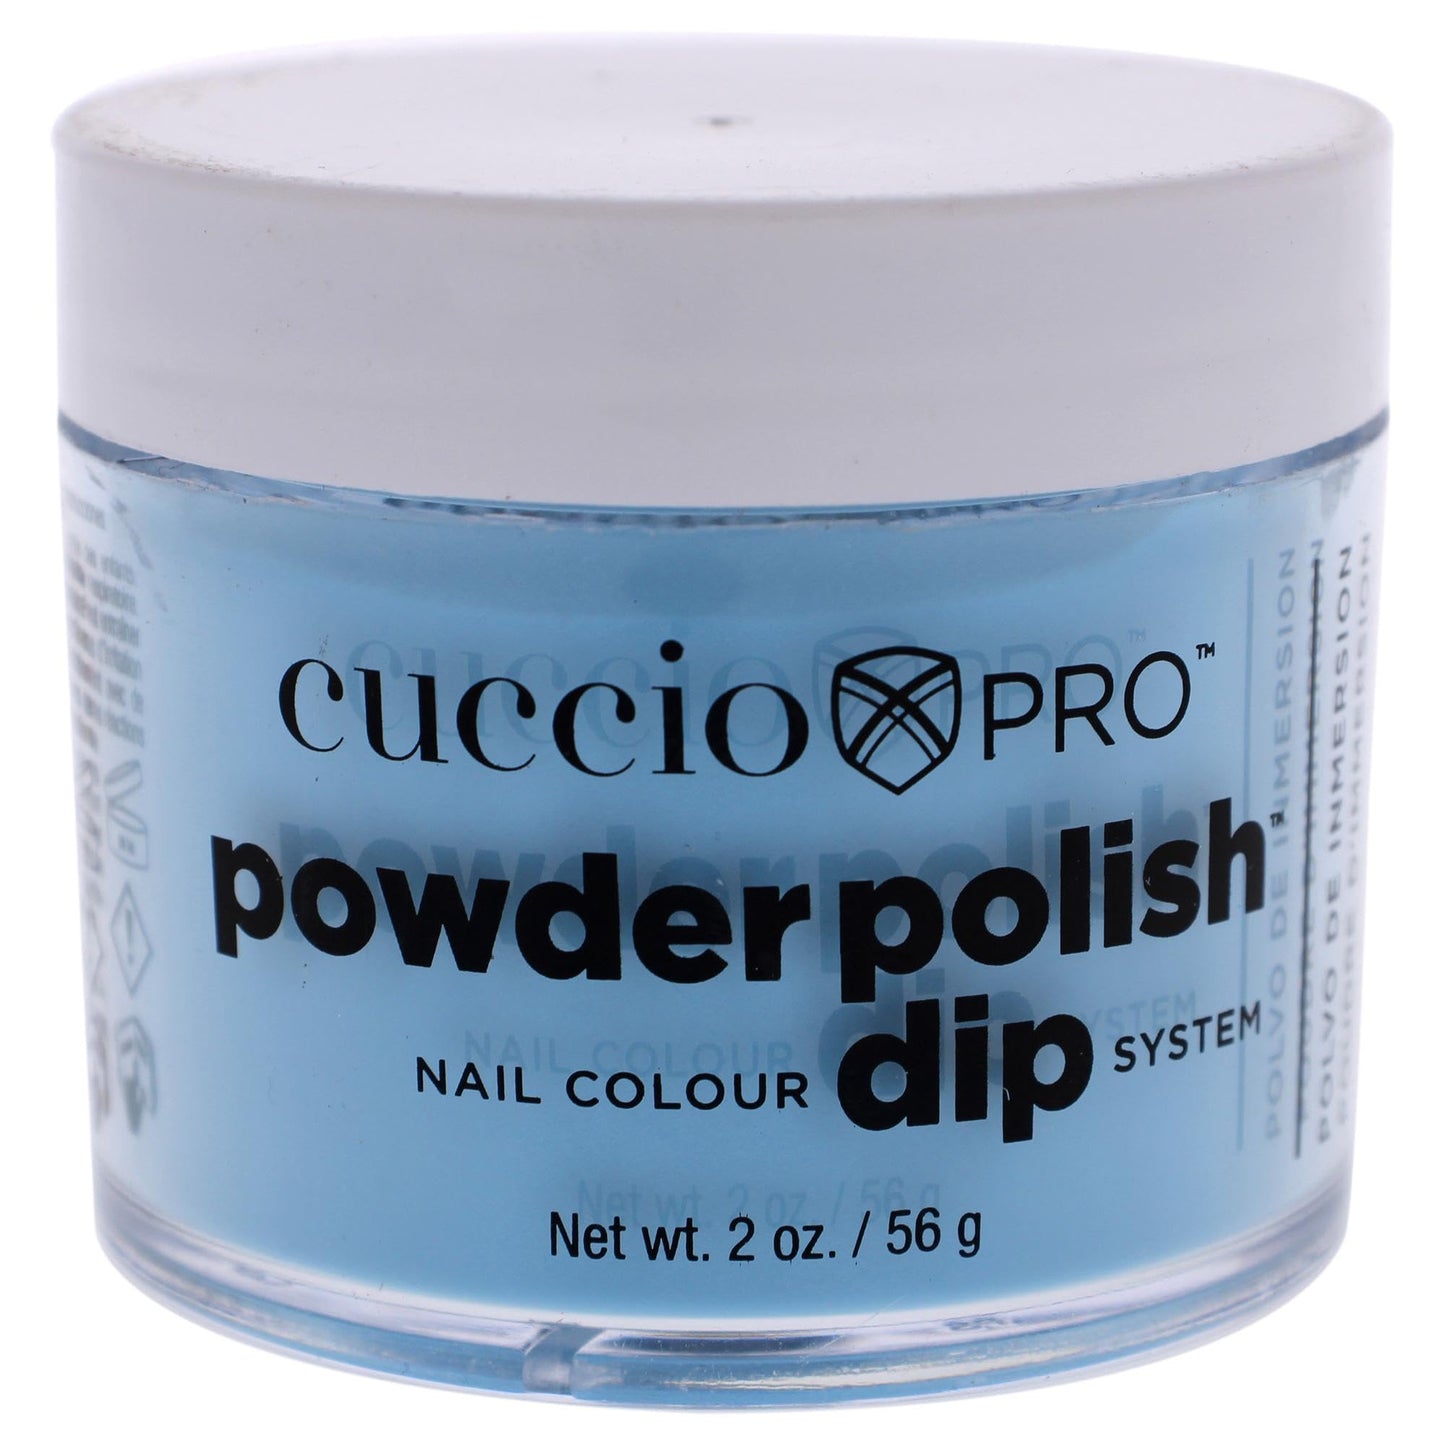 Cuccio Colour Powder Nail Polish - Lacquer For Manicure And Pedicure - Highly Pigmented Powder That Is Finely Milled - Durable Finish, Flawless Rich Color - Easy To Apply - Live Your Dreams - 1.6 Oz